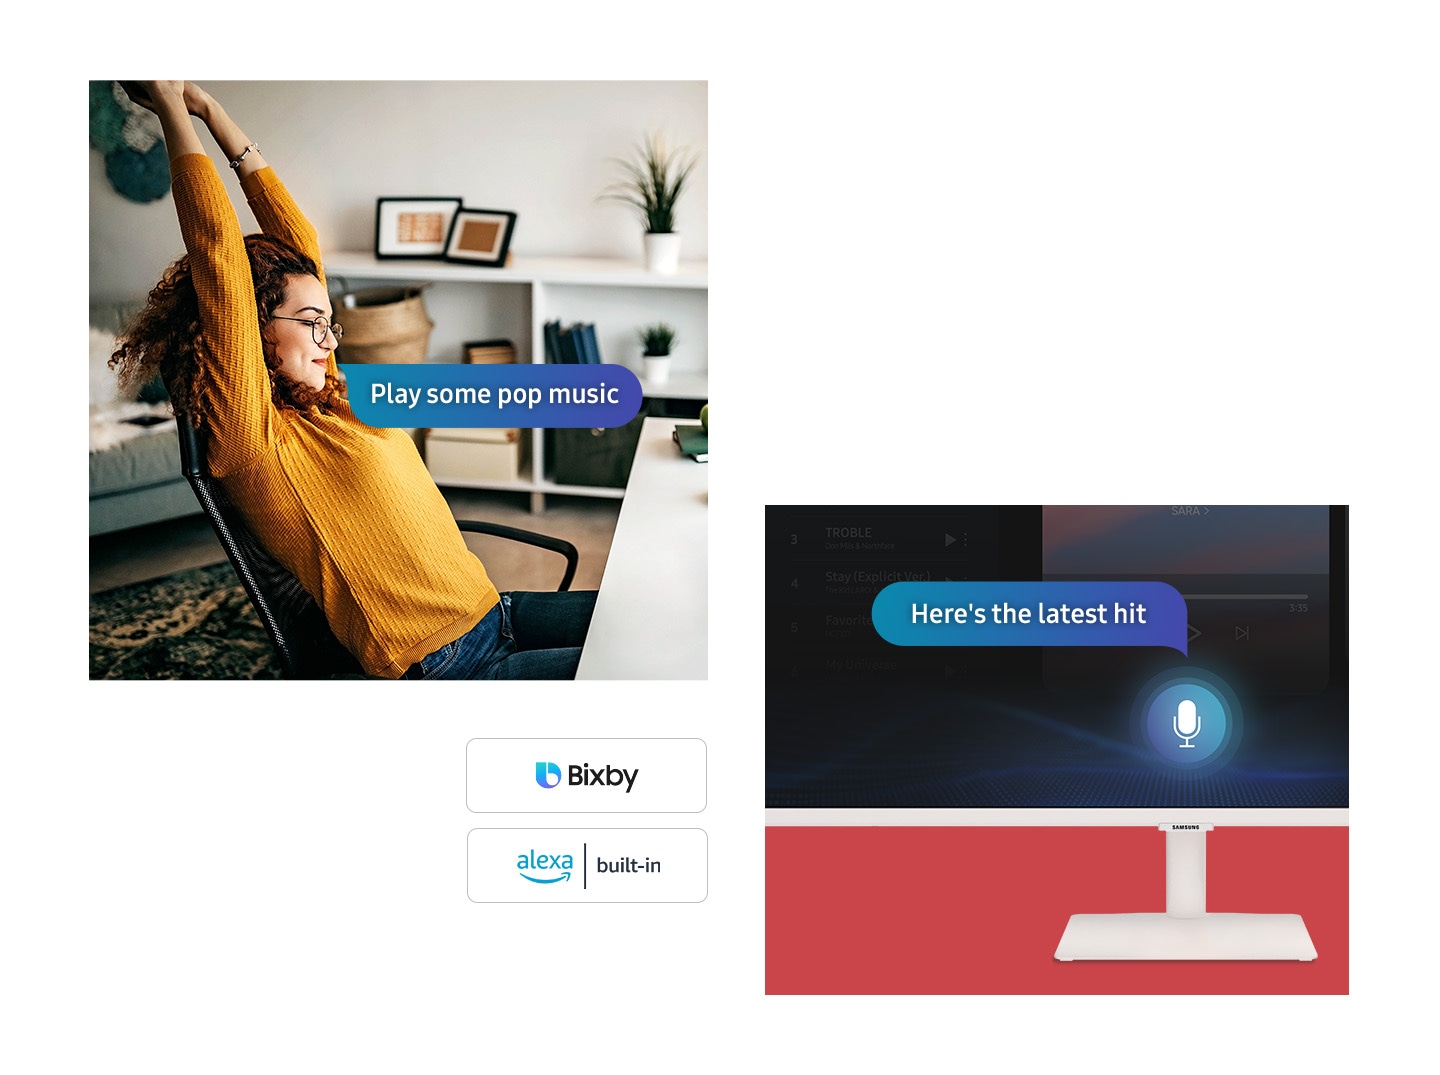 A woman sits in a chair at her desk. A word bubble next to her has the text †Play some pop music' inside. On the monitor screen next to a microphone icon, a word bubble has the text †Here's the latest hit' inside. The logos for Bixby and Amazon Alexa built-in are next to the monitor.